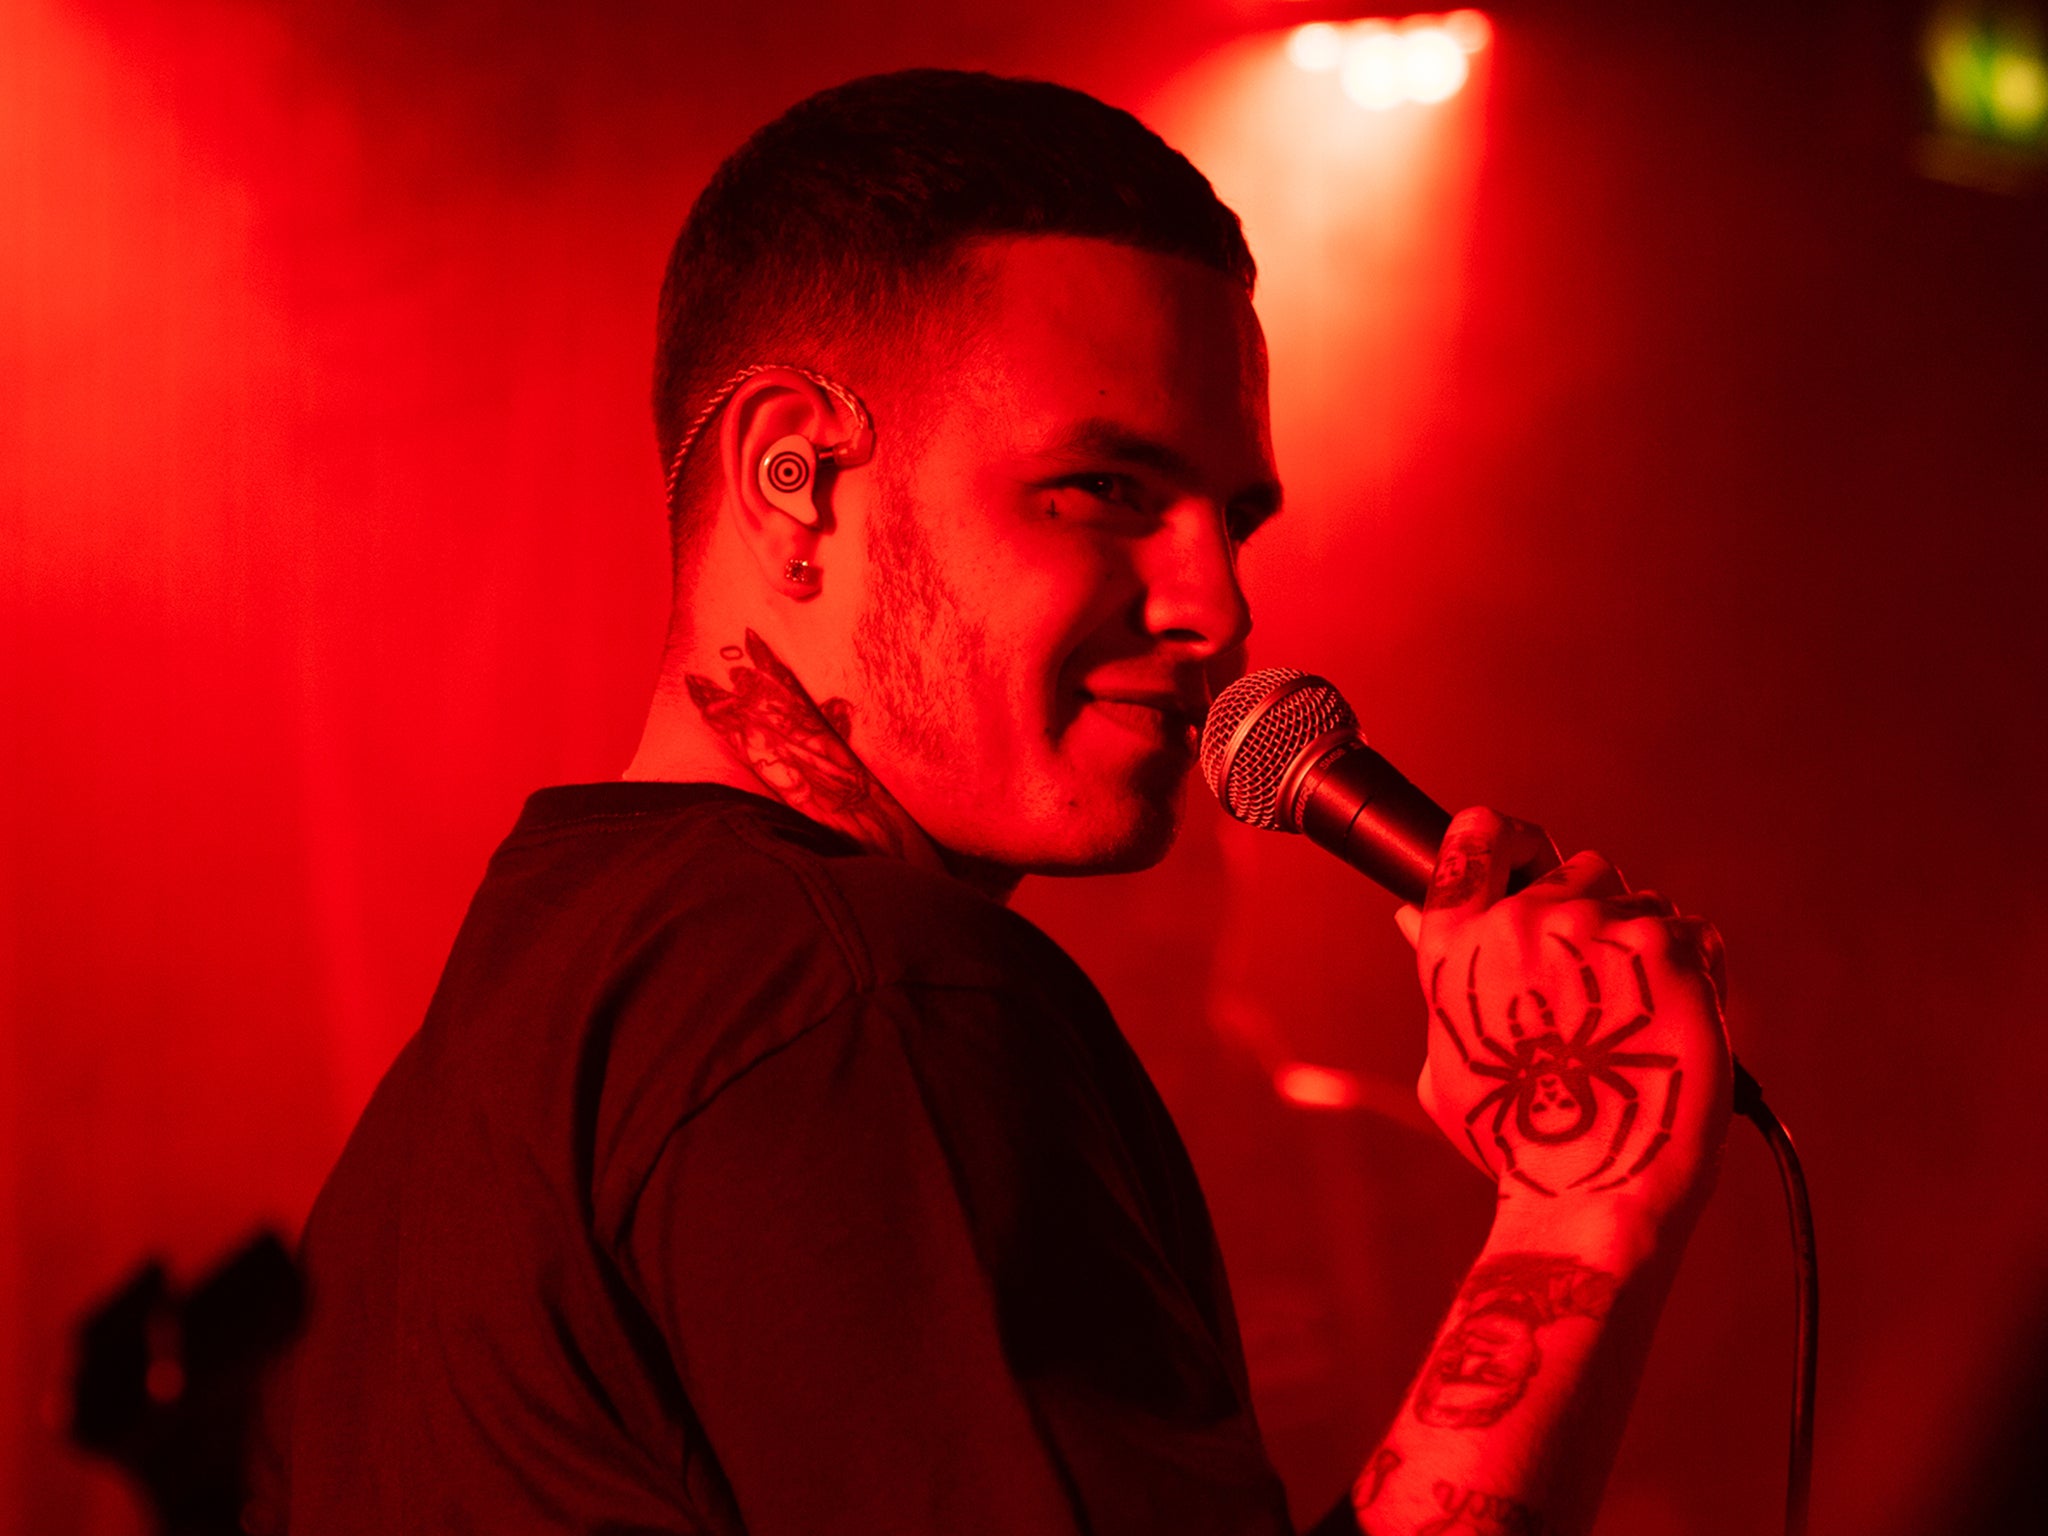 Tyron Kaymone Frampton released his debut album ‘Nothing Great About Britain’ under the name Slowthai in 2019